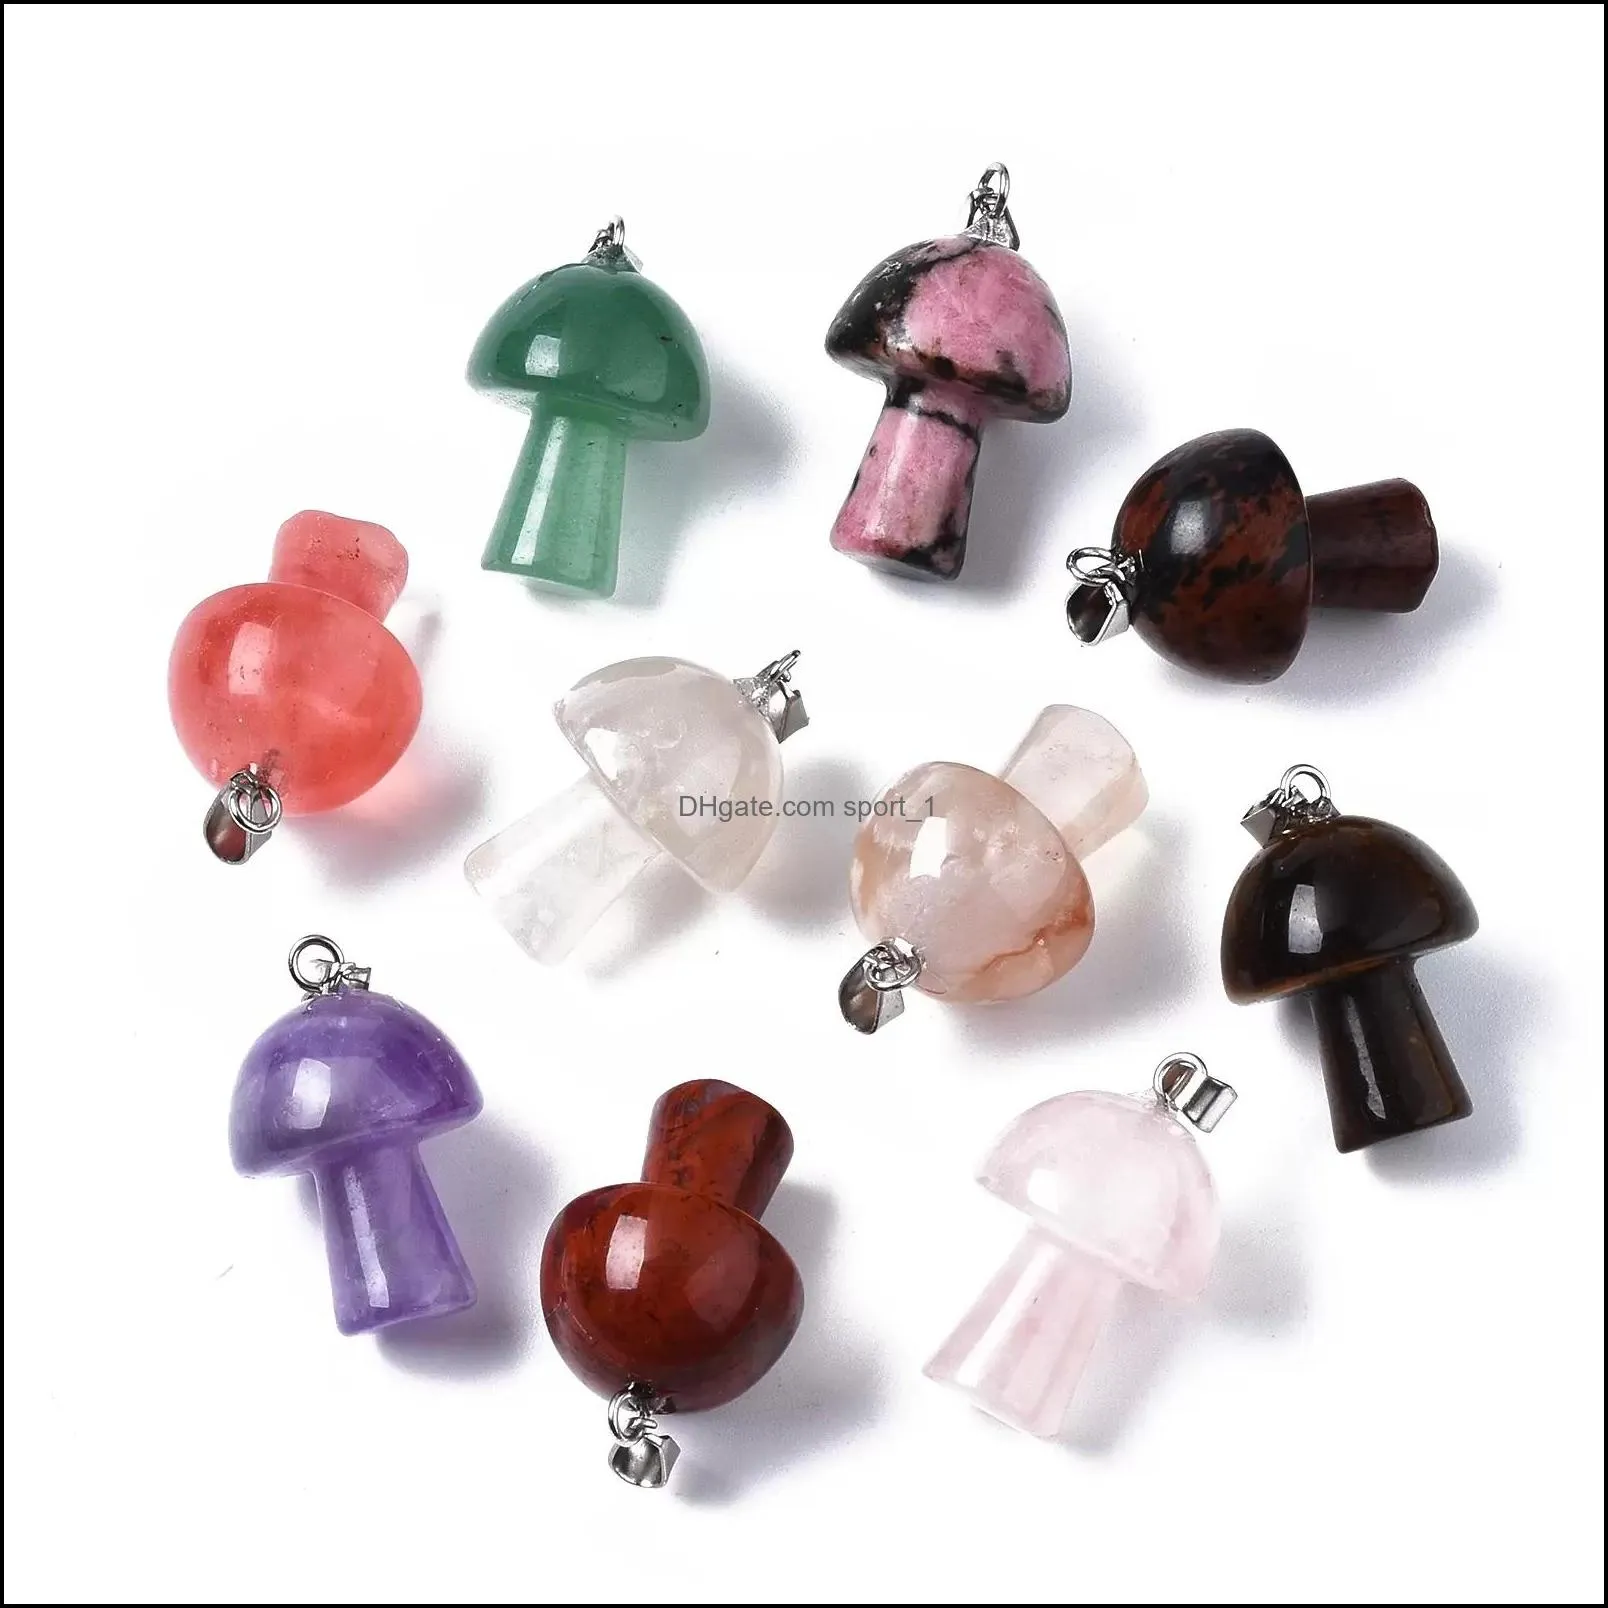 2cm natural crystal stone mushroom charms rose quartz green brown stones pendant for diy jewelry making necklace